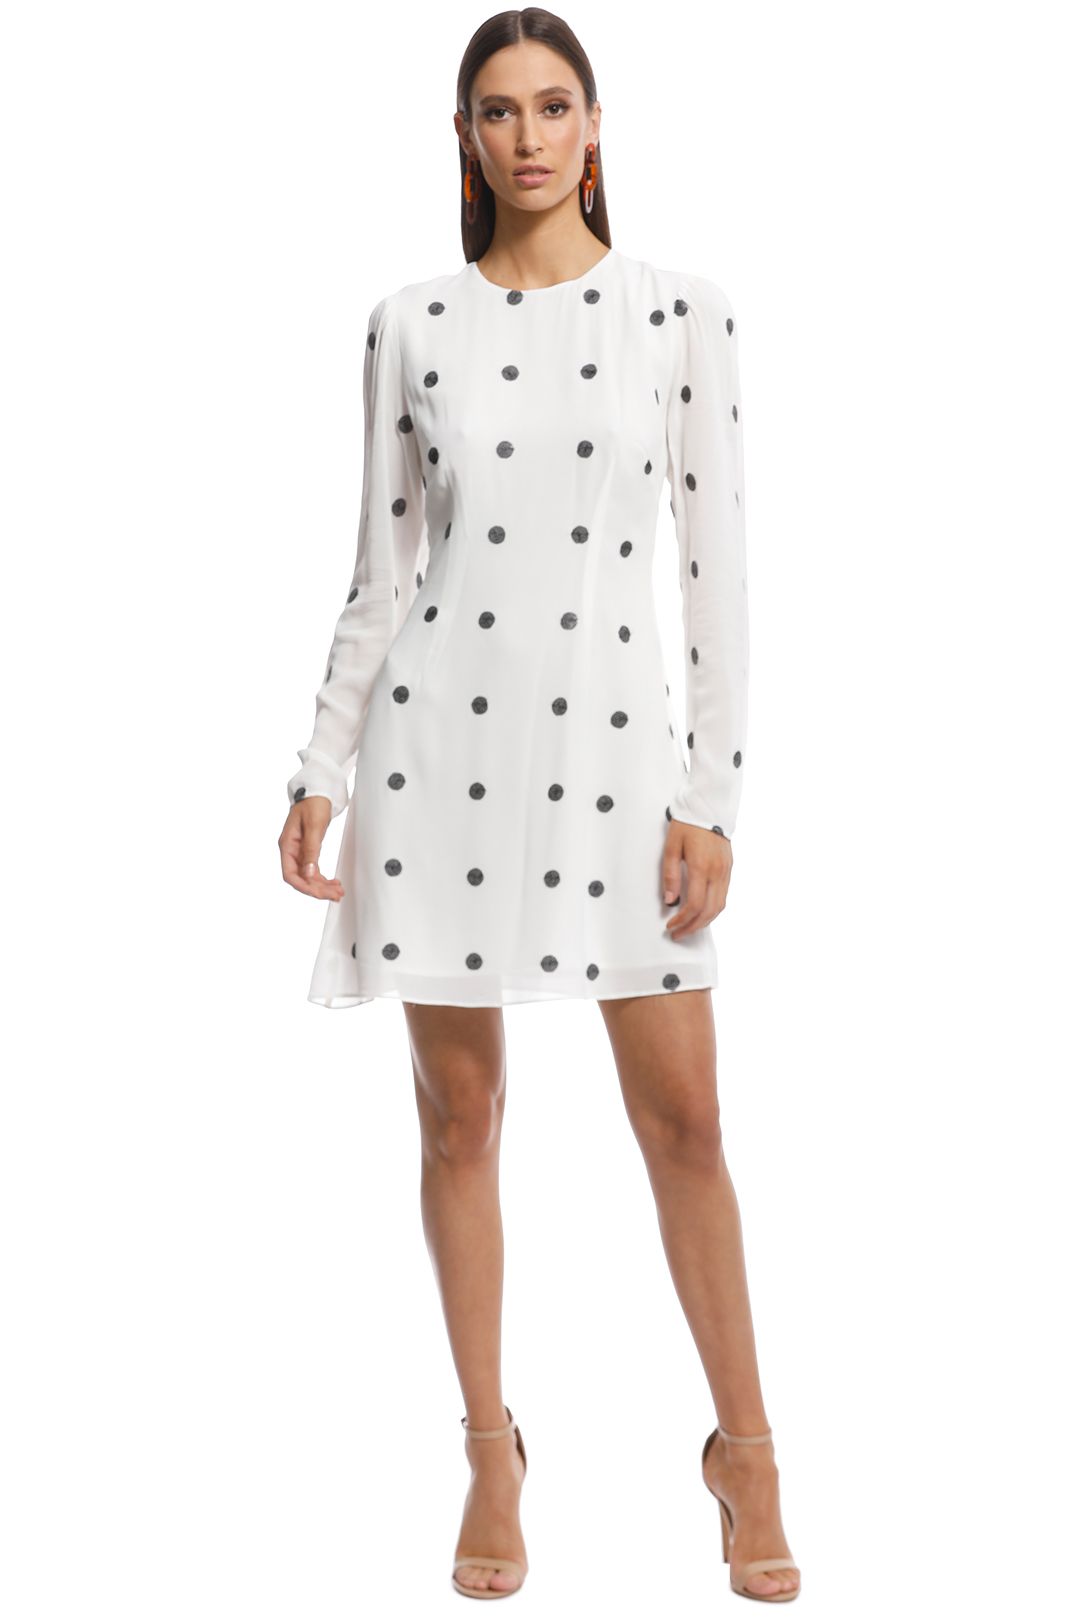 Talulah - Forget Me Not LS Mini Dress - Black and White - Front